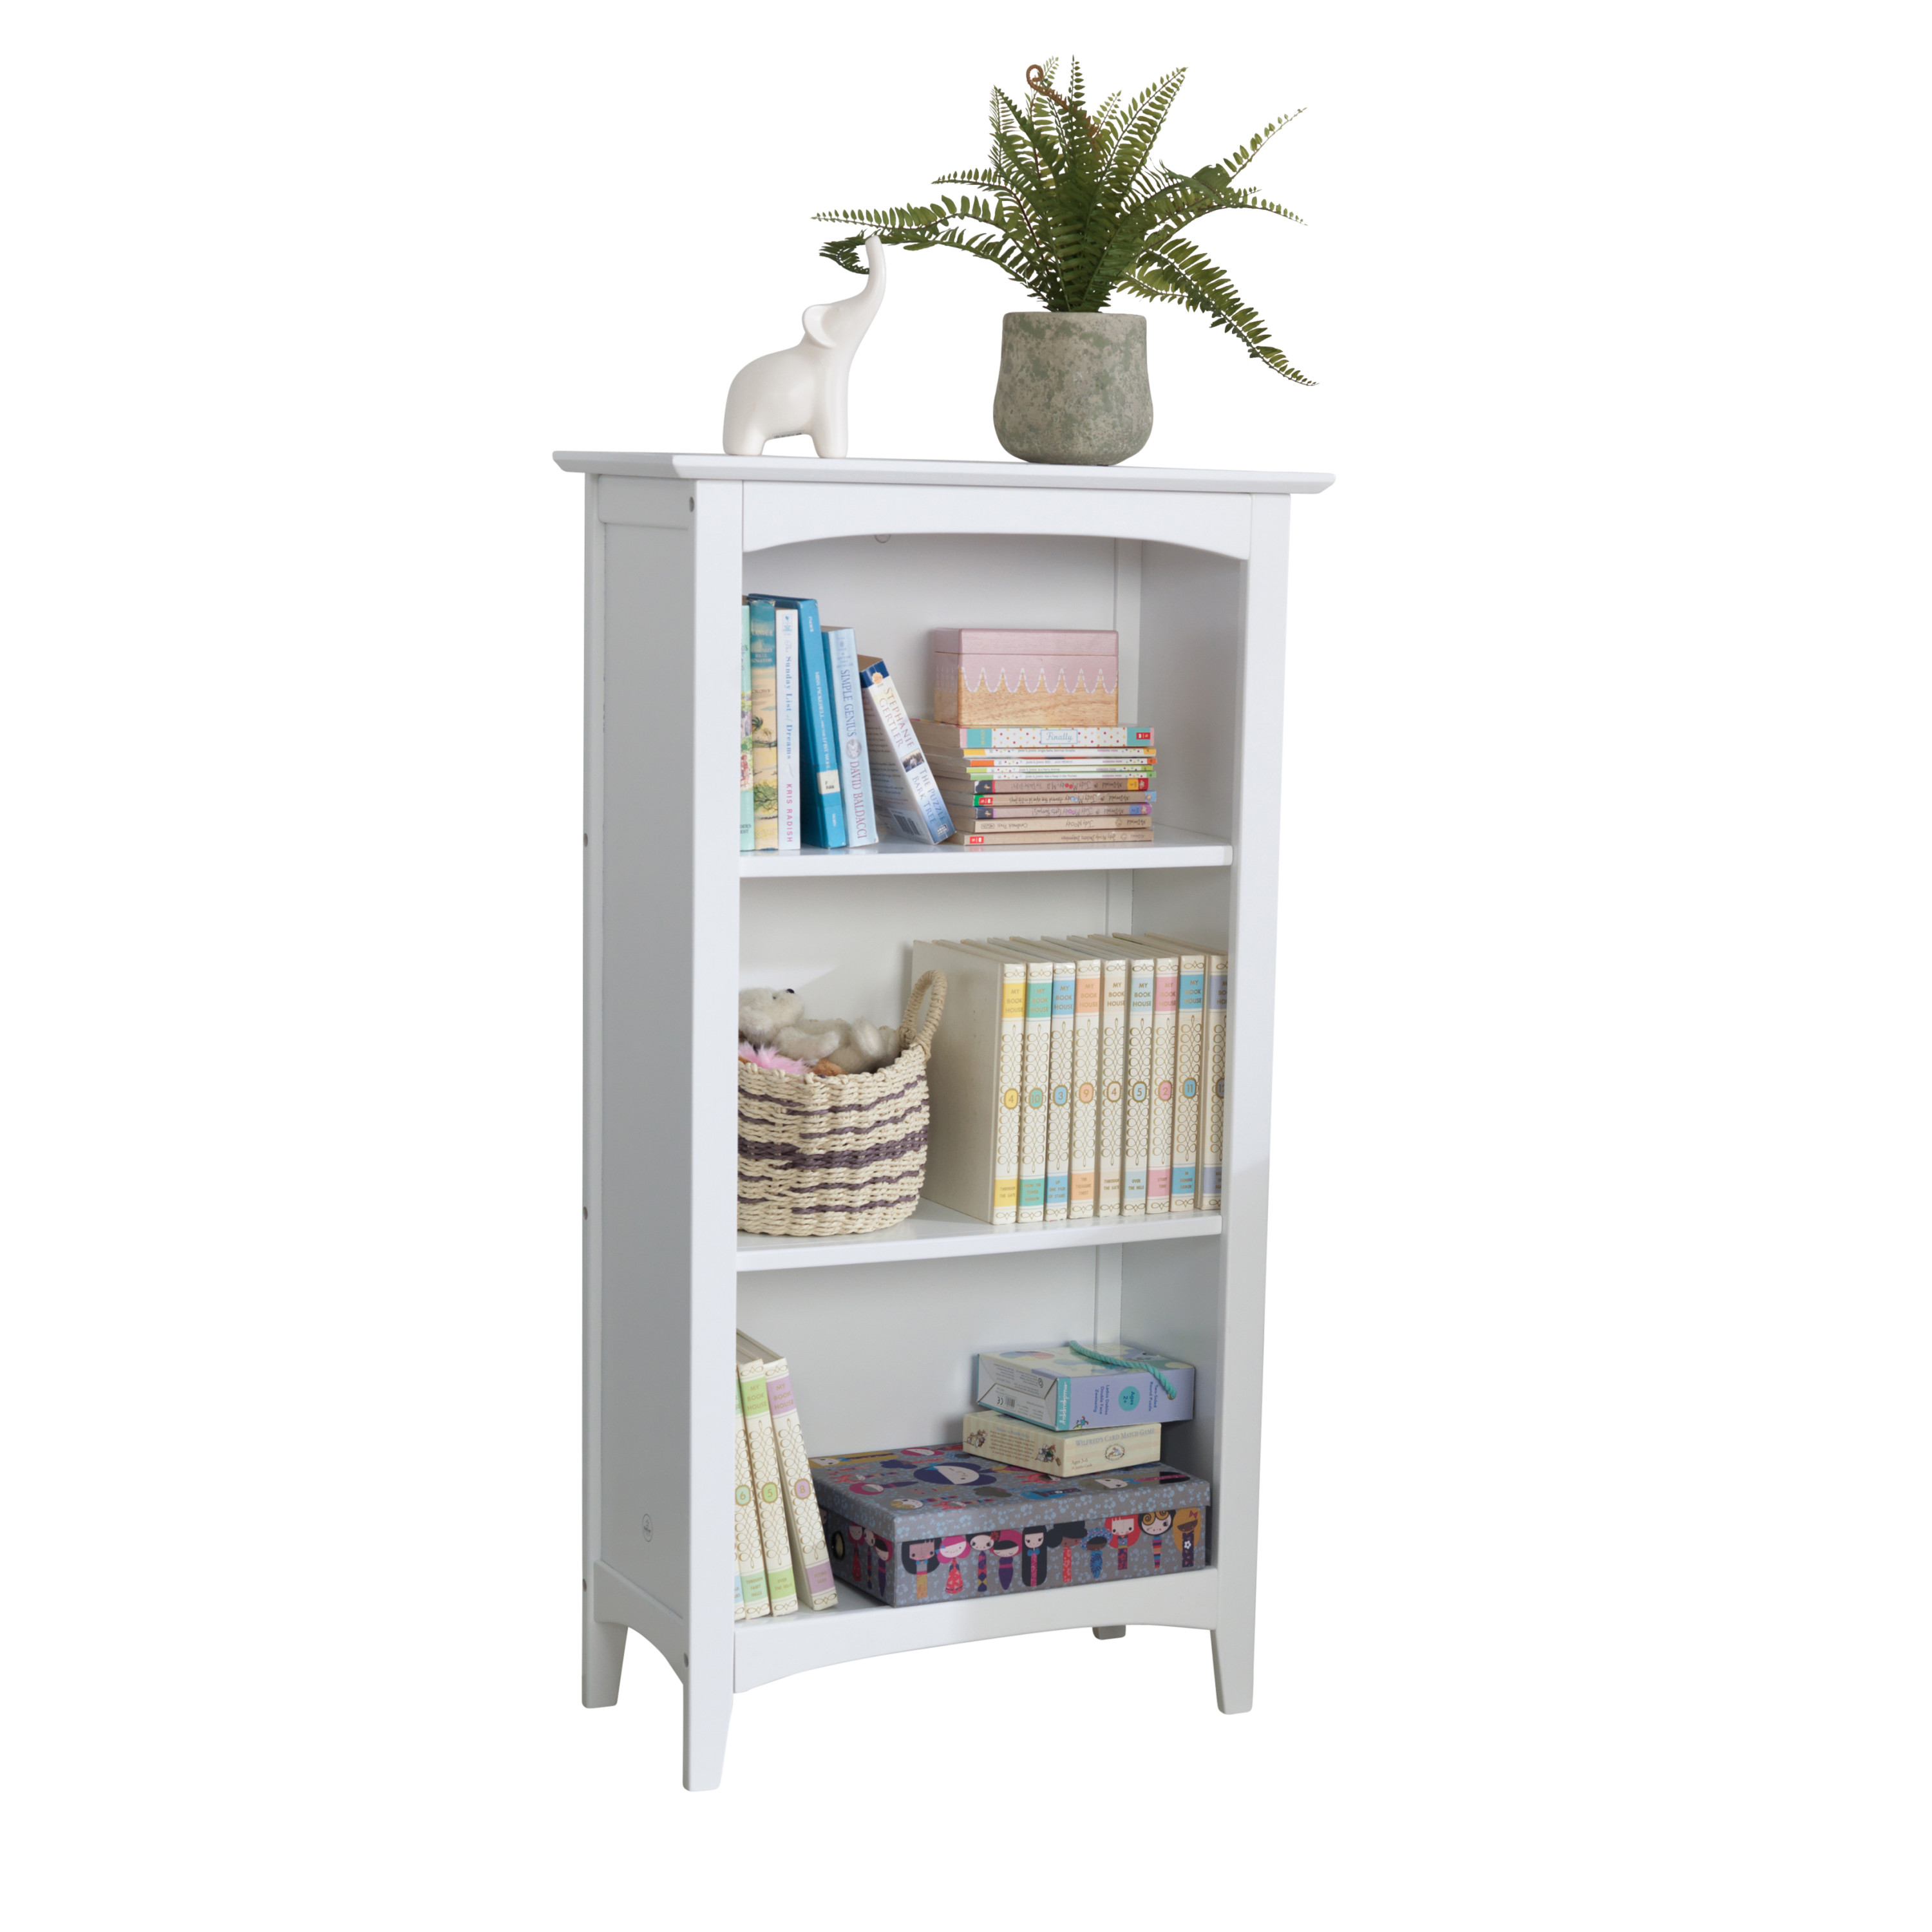 KidKraft Avalon Wooden Three-Shelf Kid's Bookcase with Curved Arch Design - White - image 4 of 4